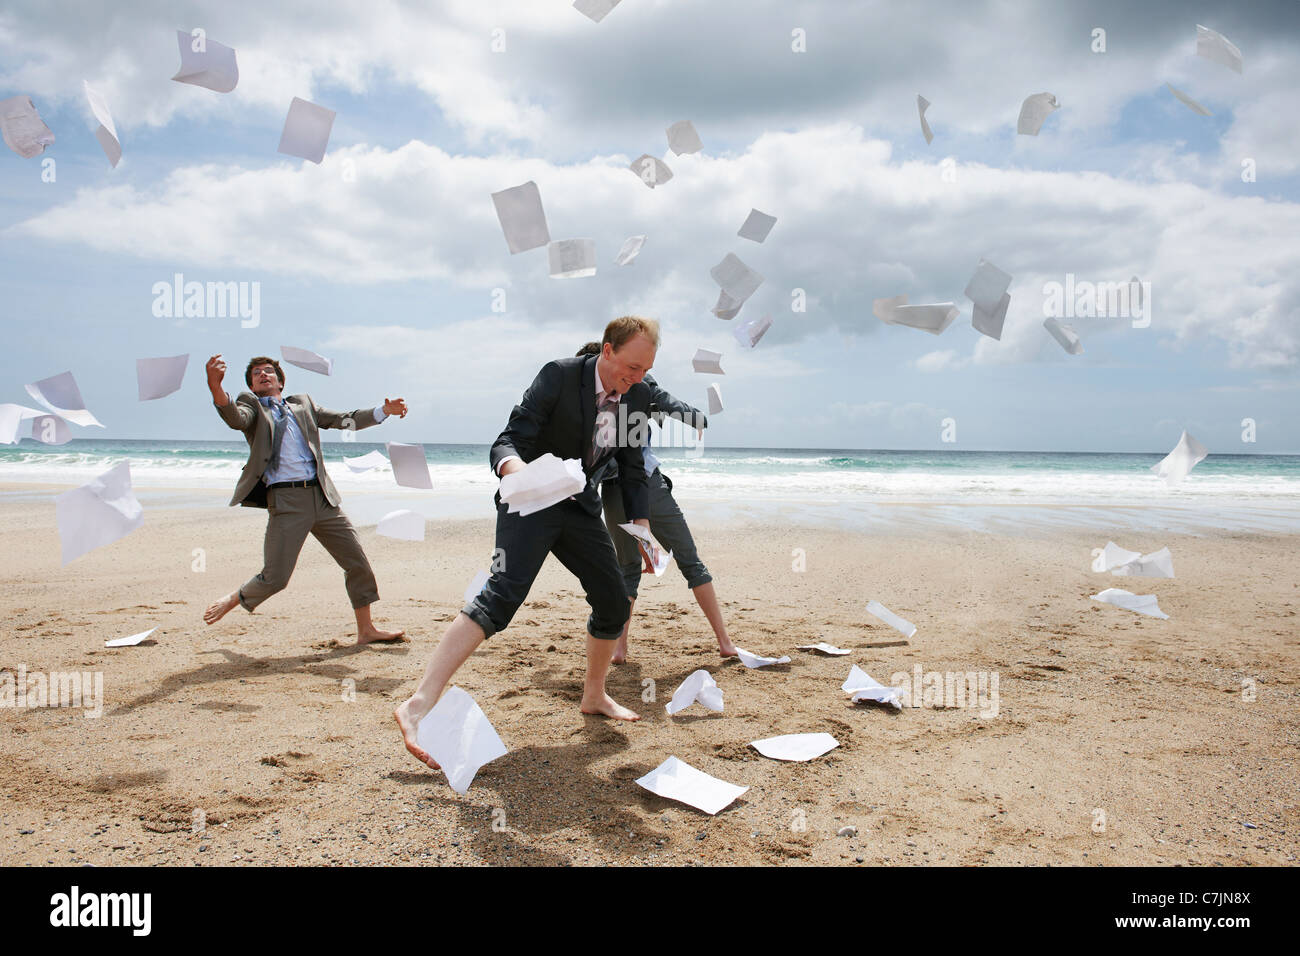 Businessmen tossing papers away at beach Stock Photo